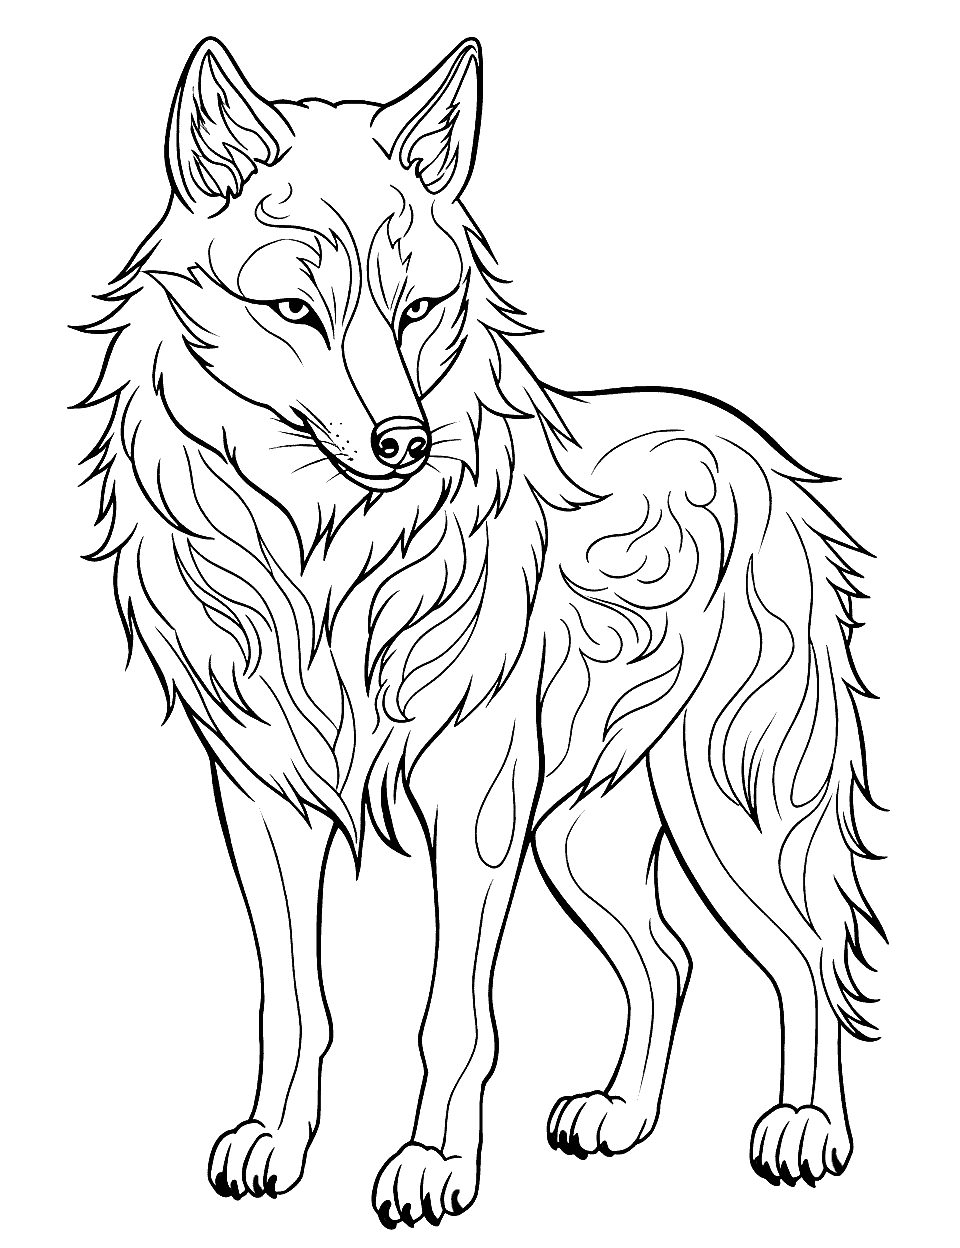 Firewolf Wolf Coloring Page - A wolf made entirely of flames, lighting up the night.